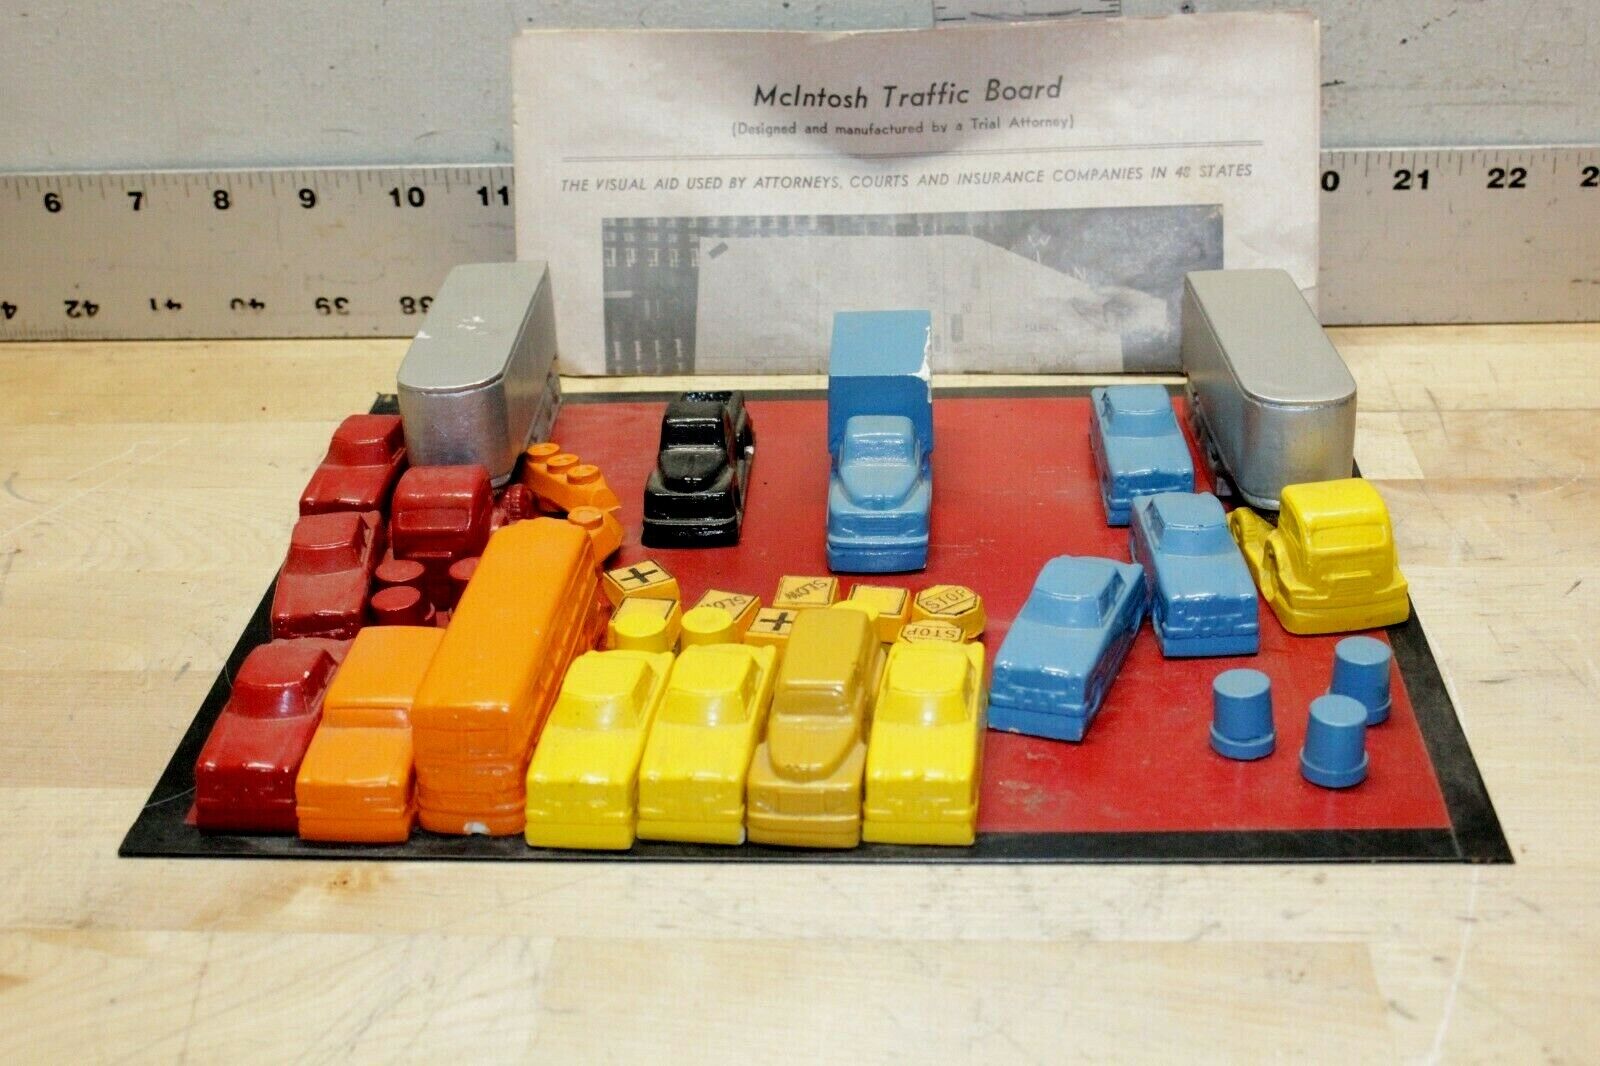 Vintage McIntosh Traffic Board Visual Aid for Attorneys Courts Ins Companies